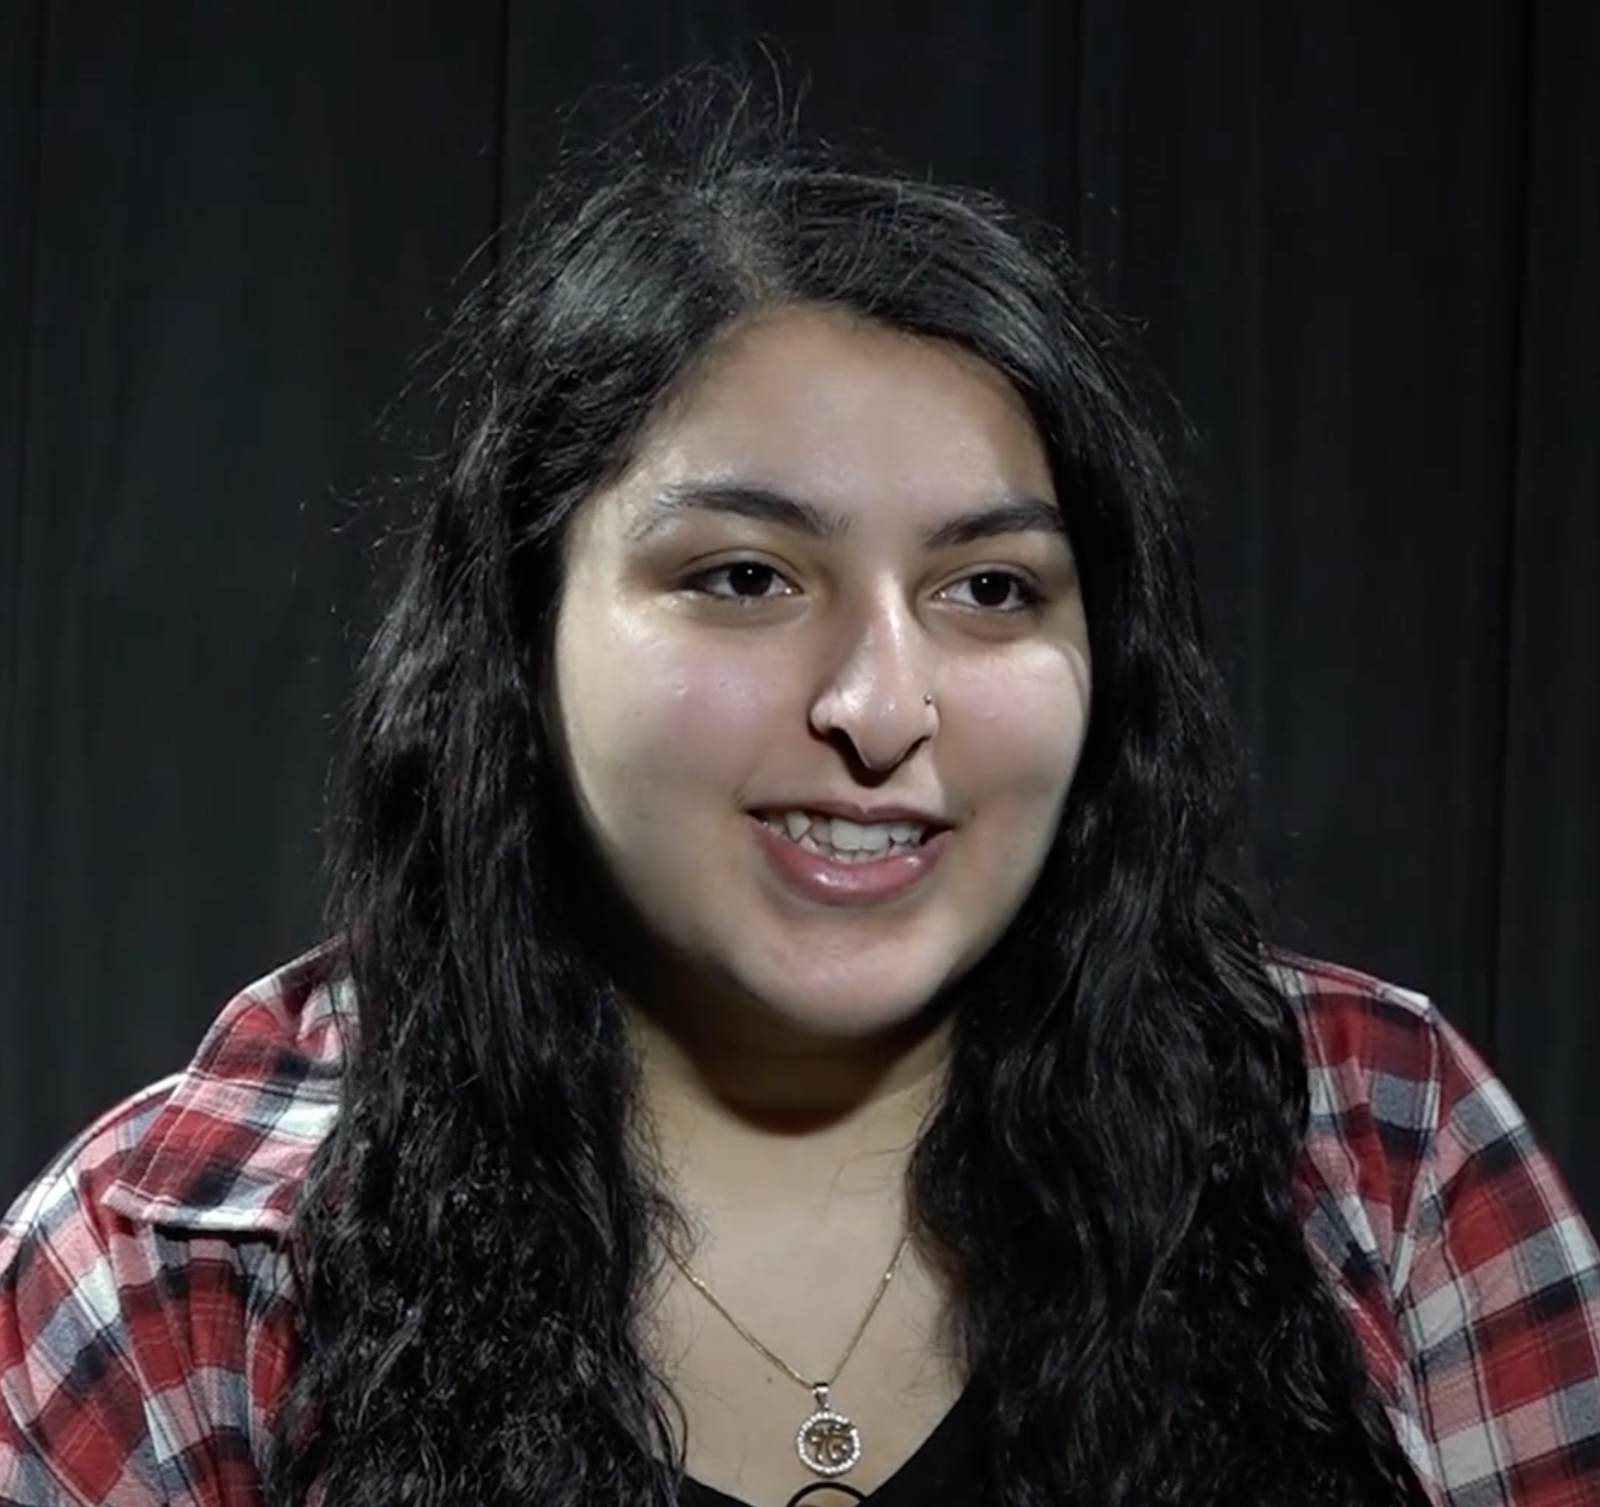 Screen capture of Sargun from her video interview